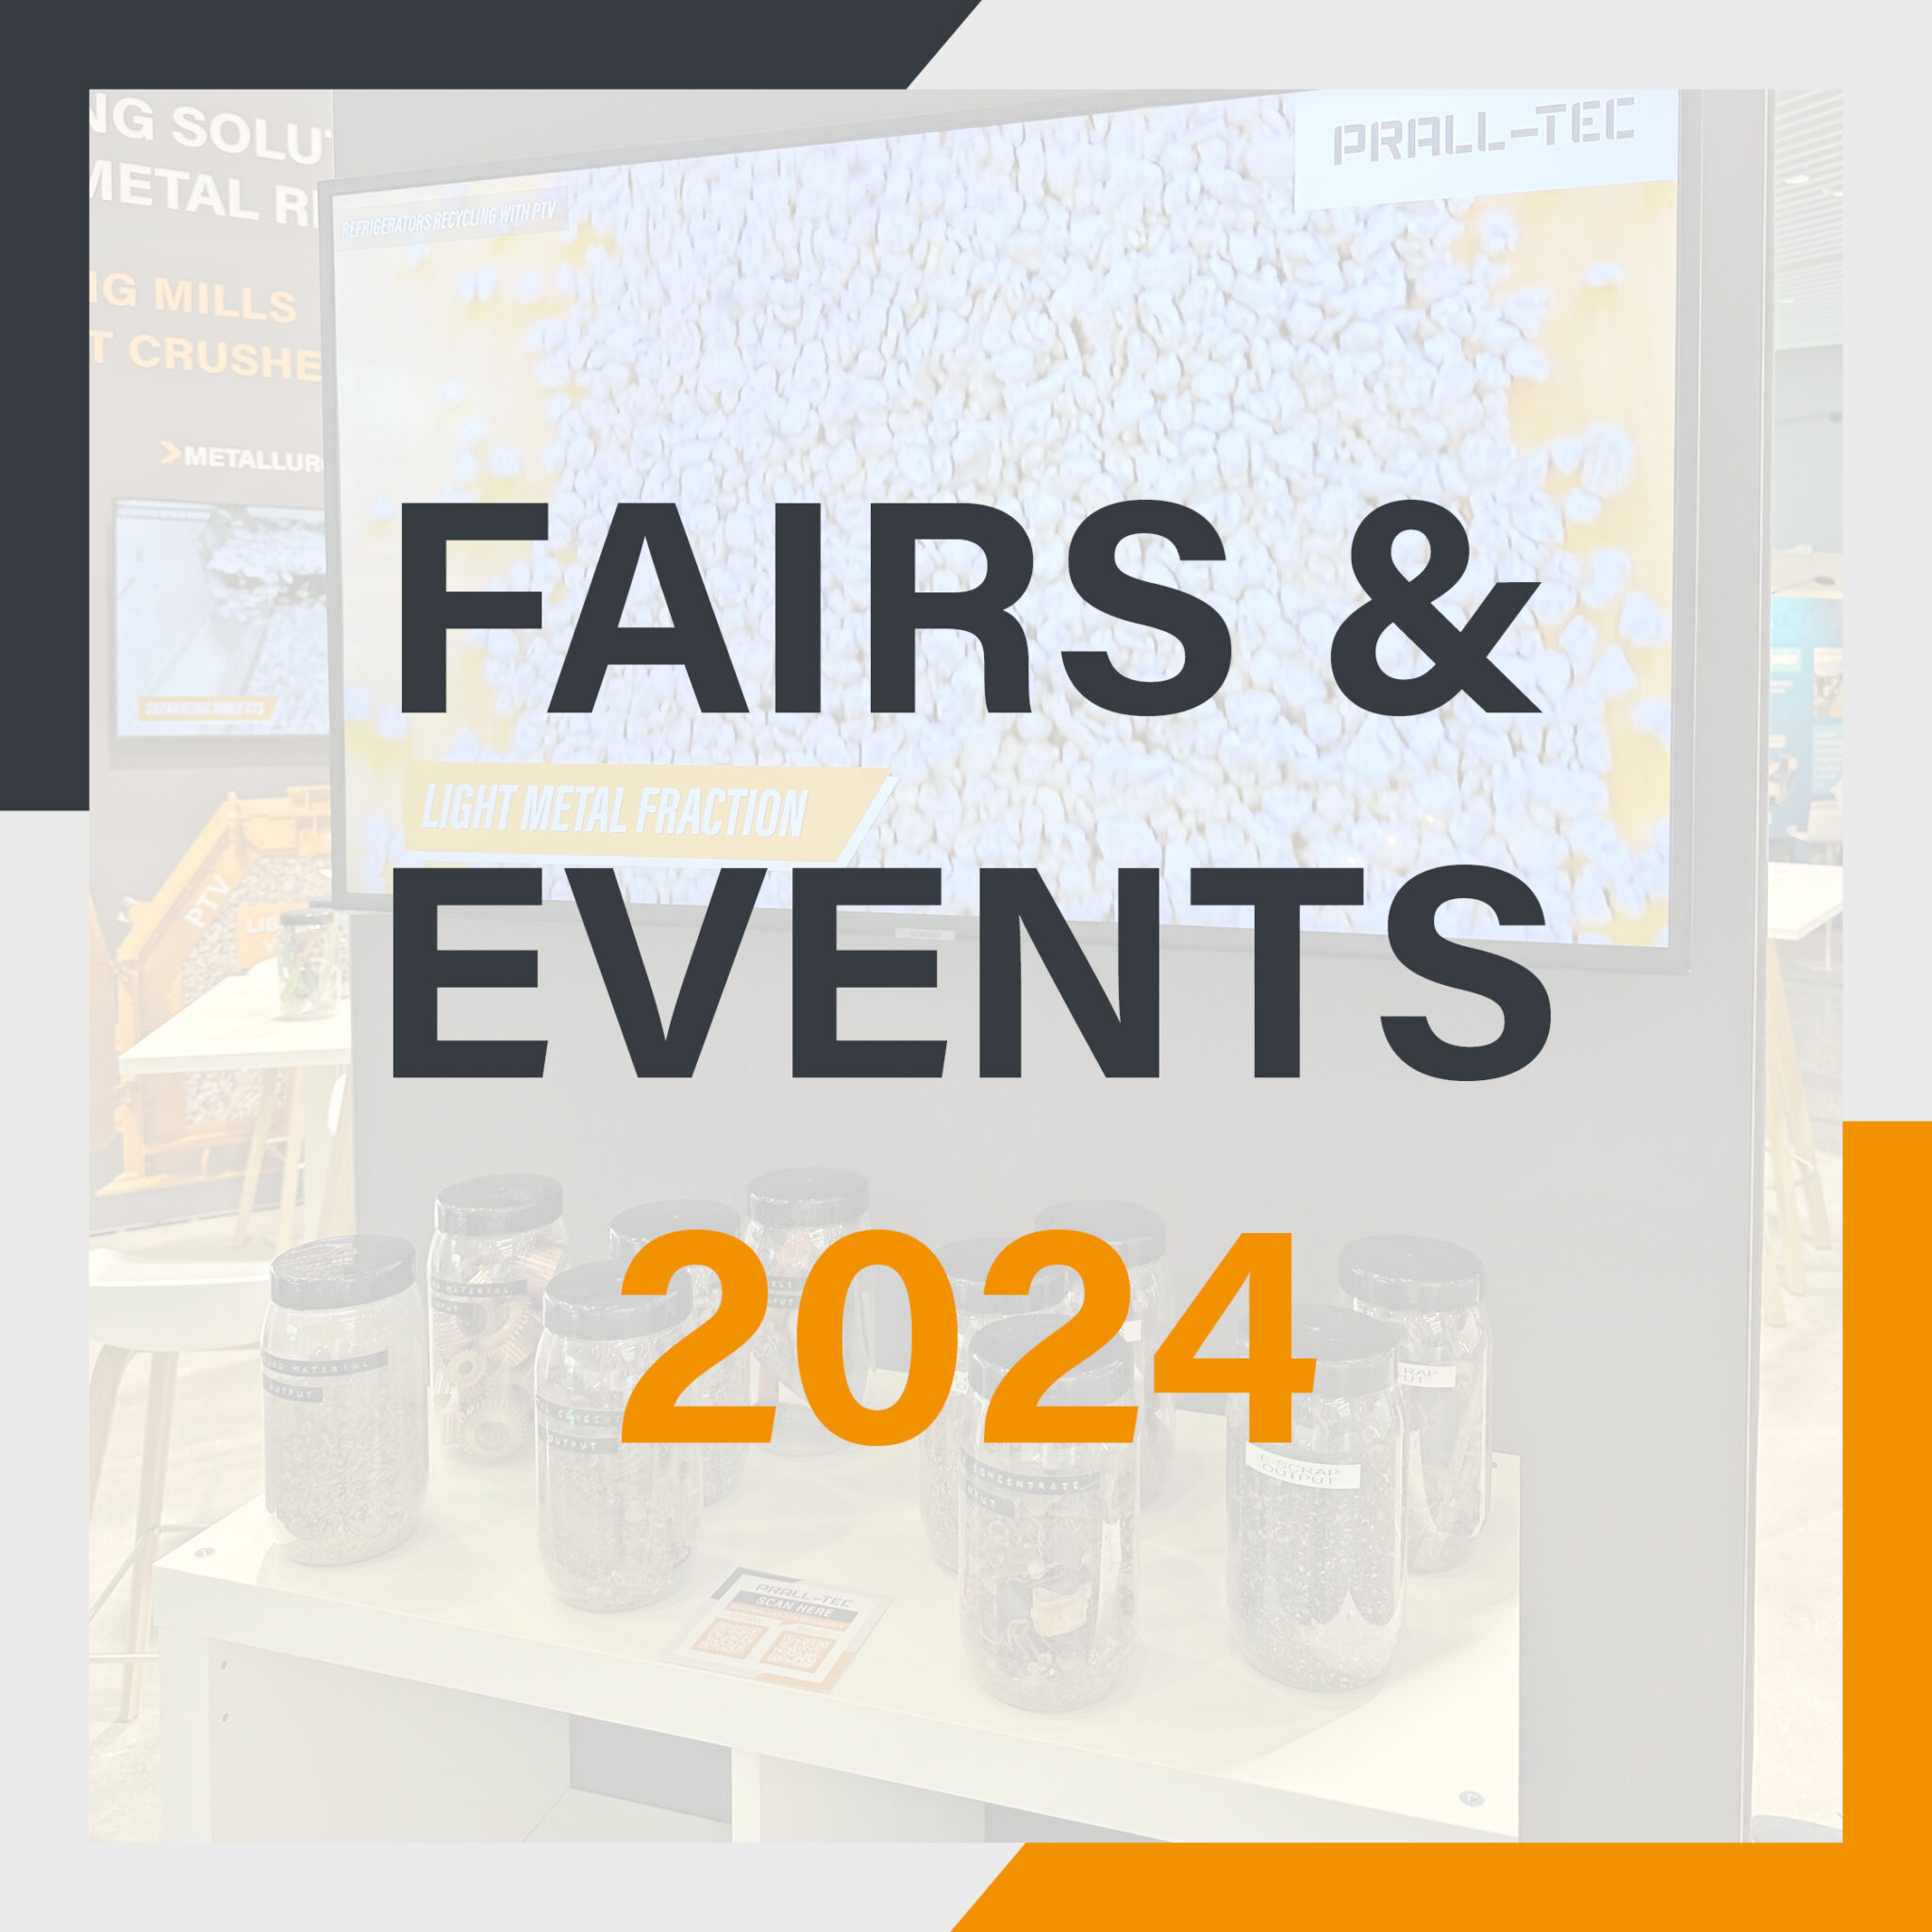 At numerous trade fairs and events in 2024